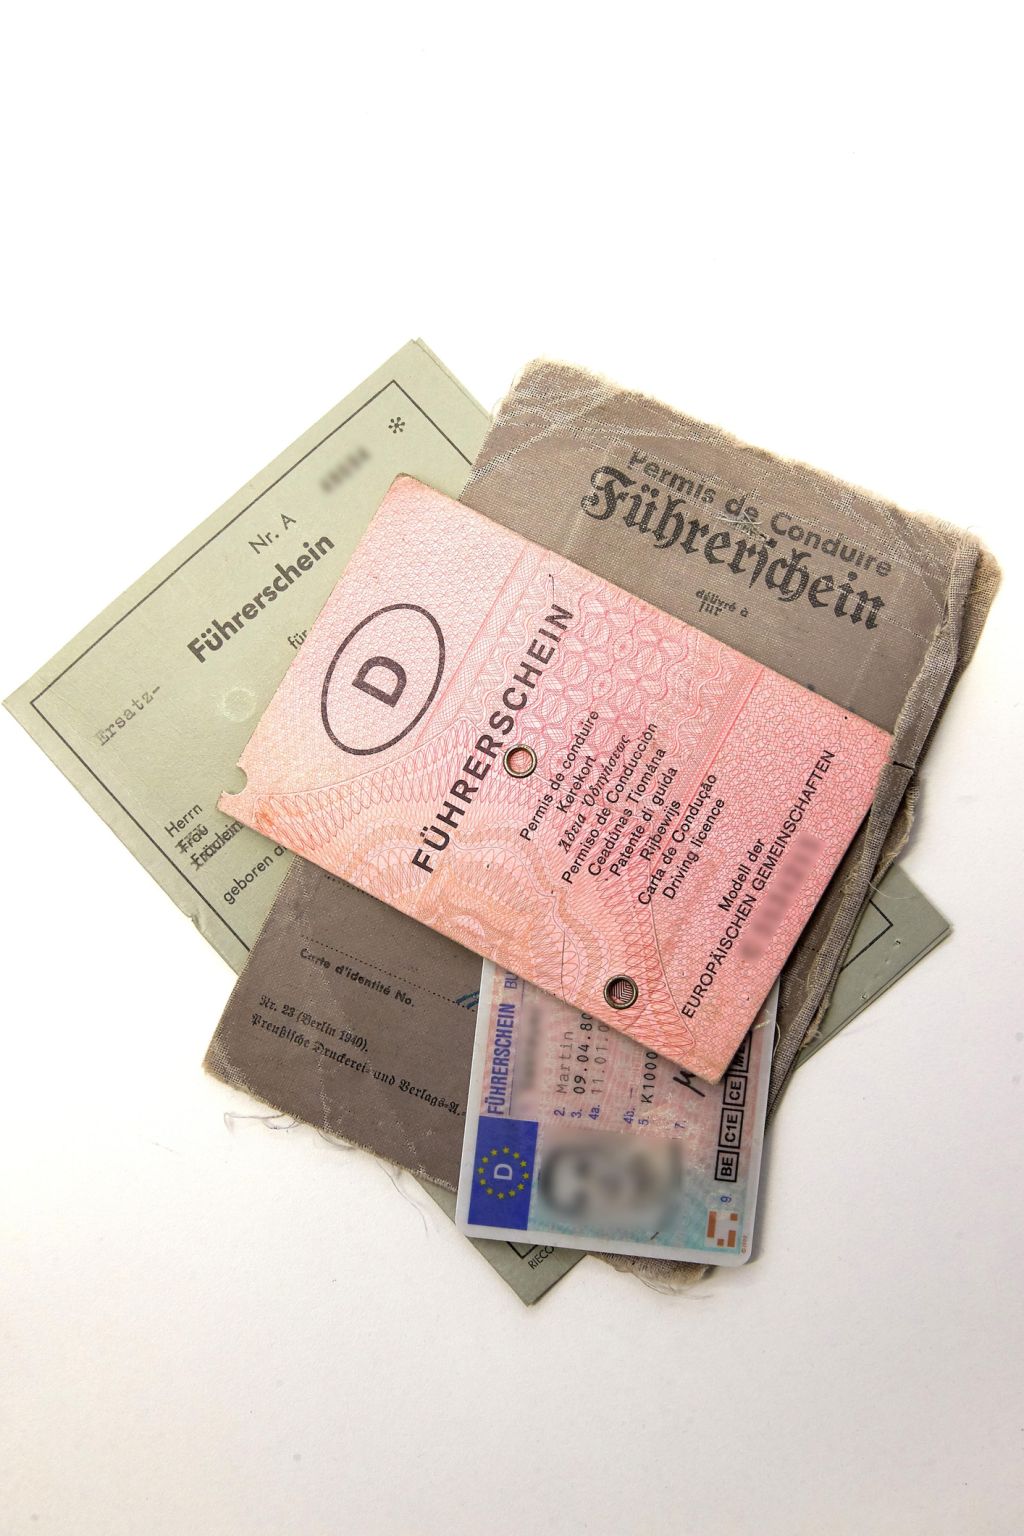 Old and new driver's license, various still valid German driver's licenses, Germany